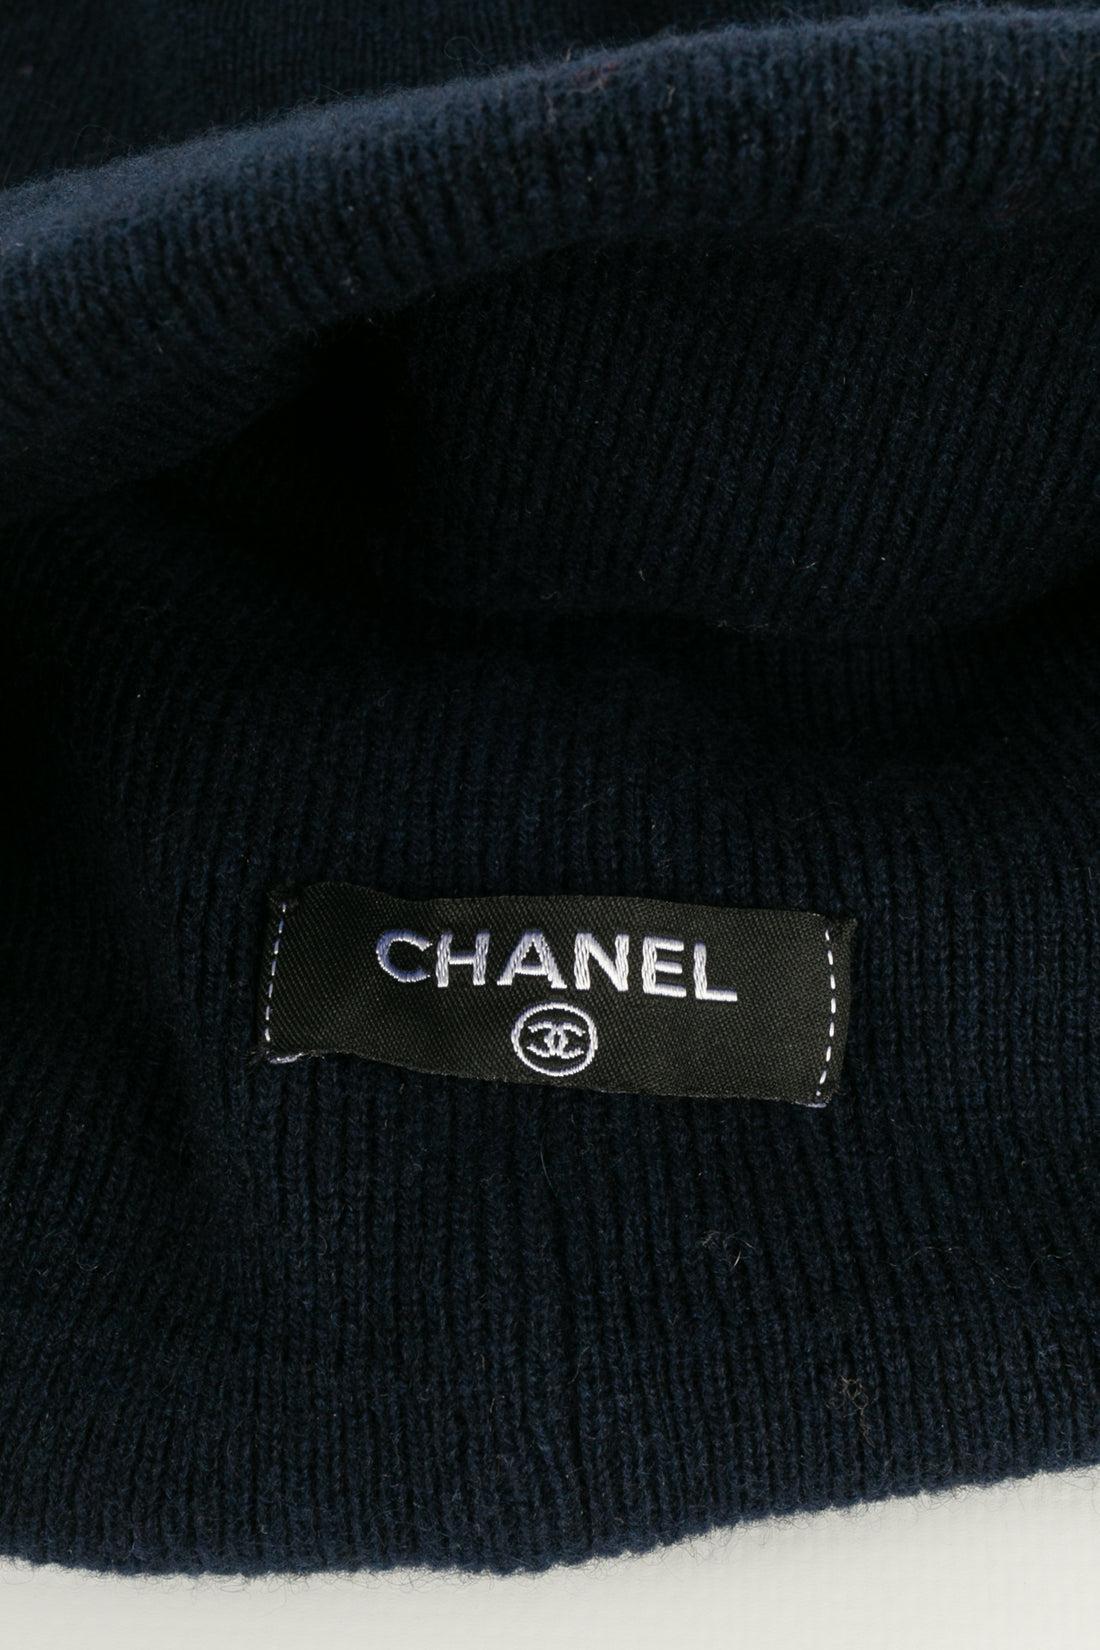 Chanel Cashmere Scarf, Pair of Gloves and Blue Hat Set 5